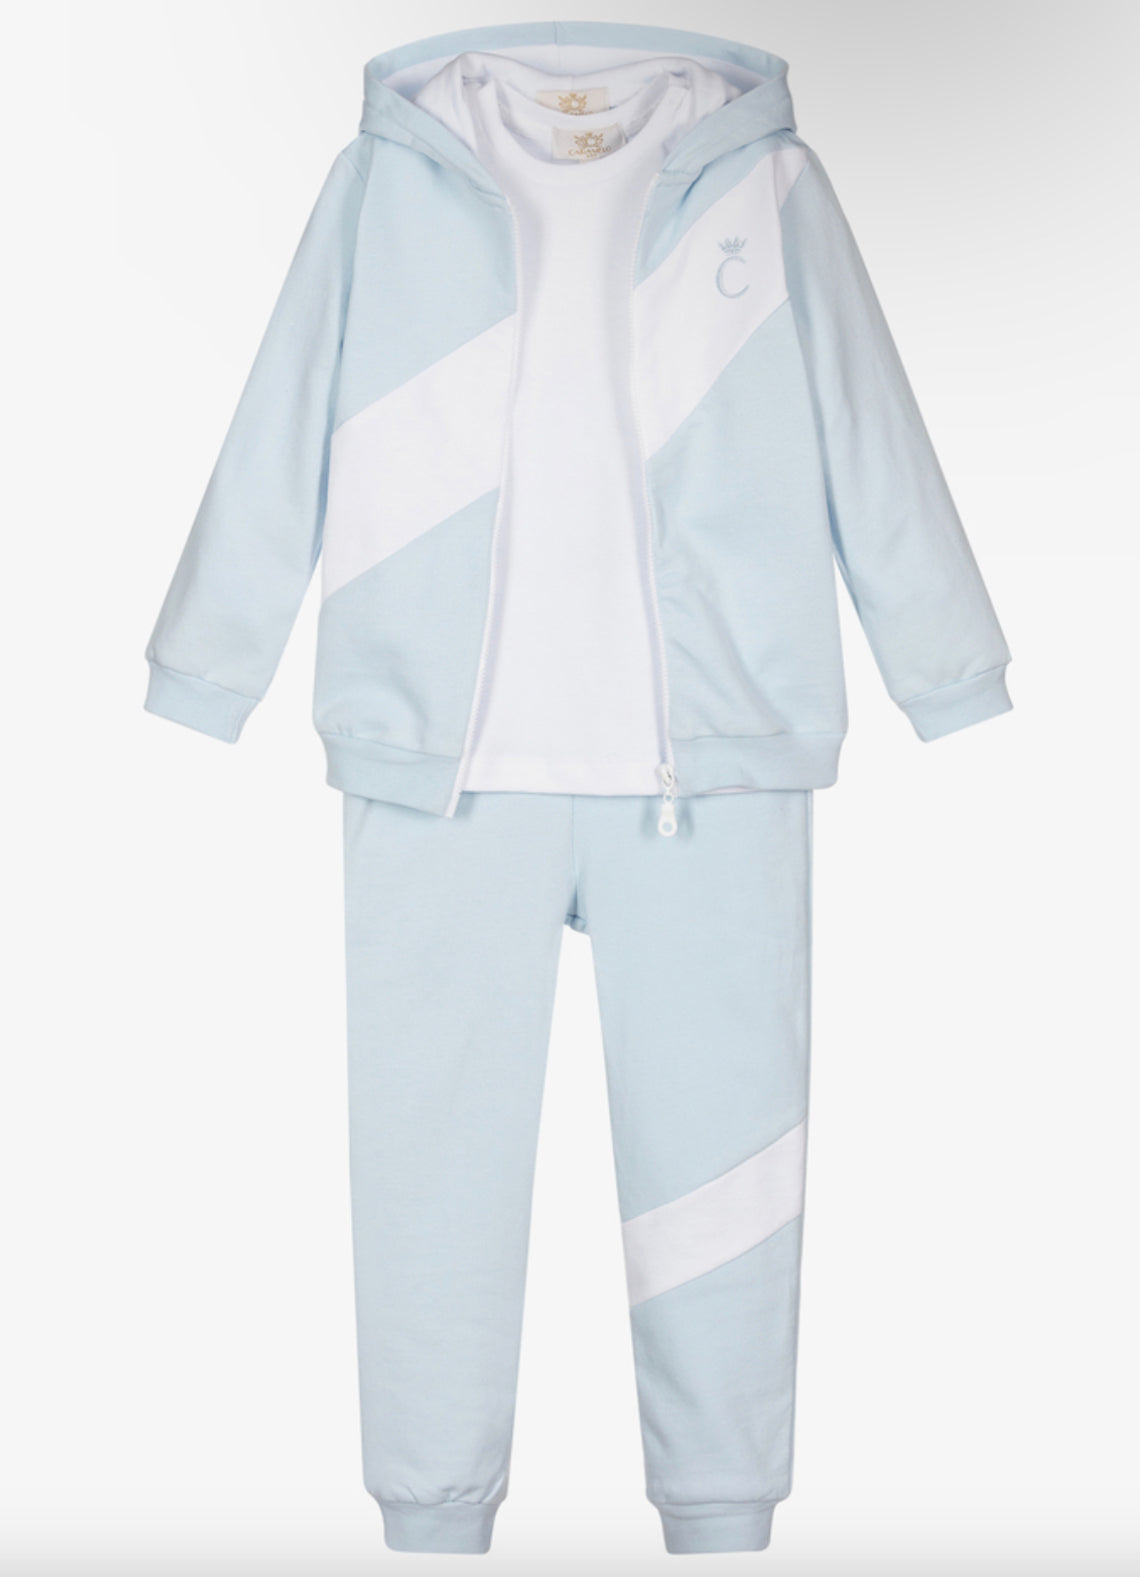 Caramelo AW23 Boys 3 Piece Hooded Tracksuit in Blue  - 103156